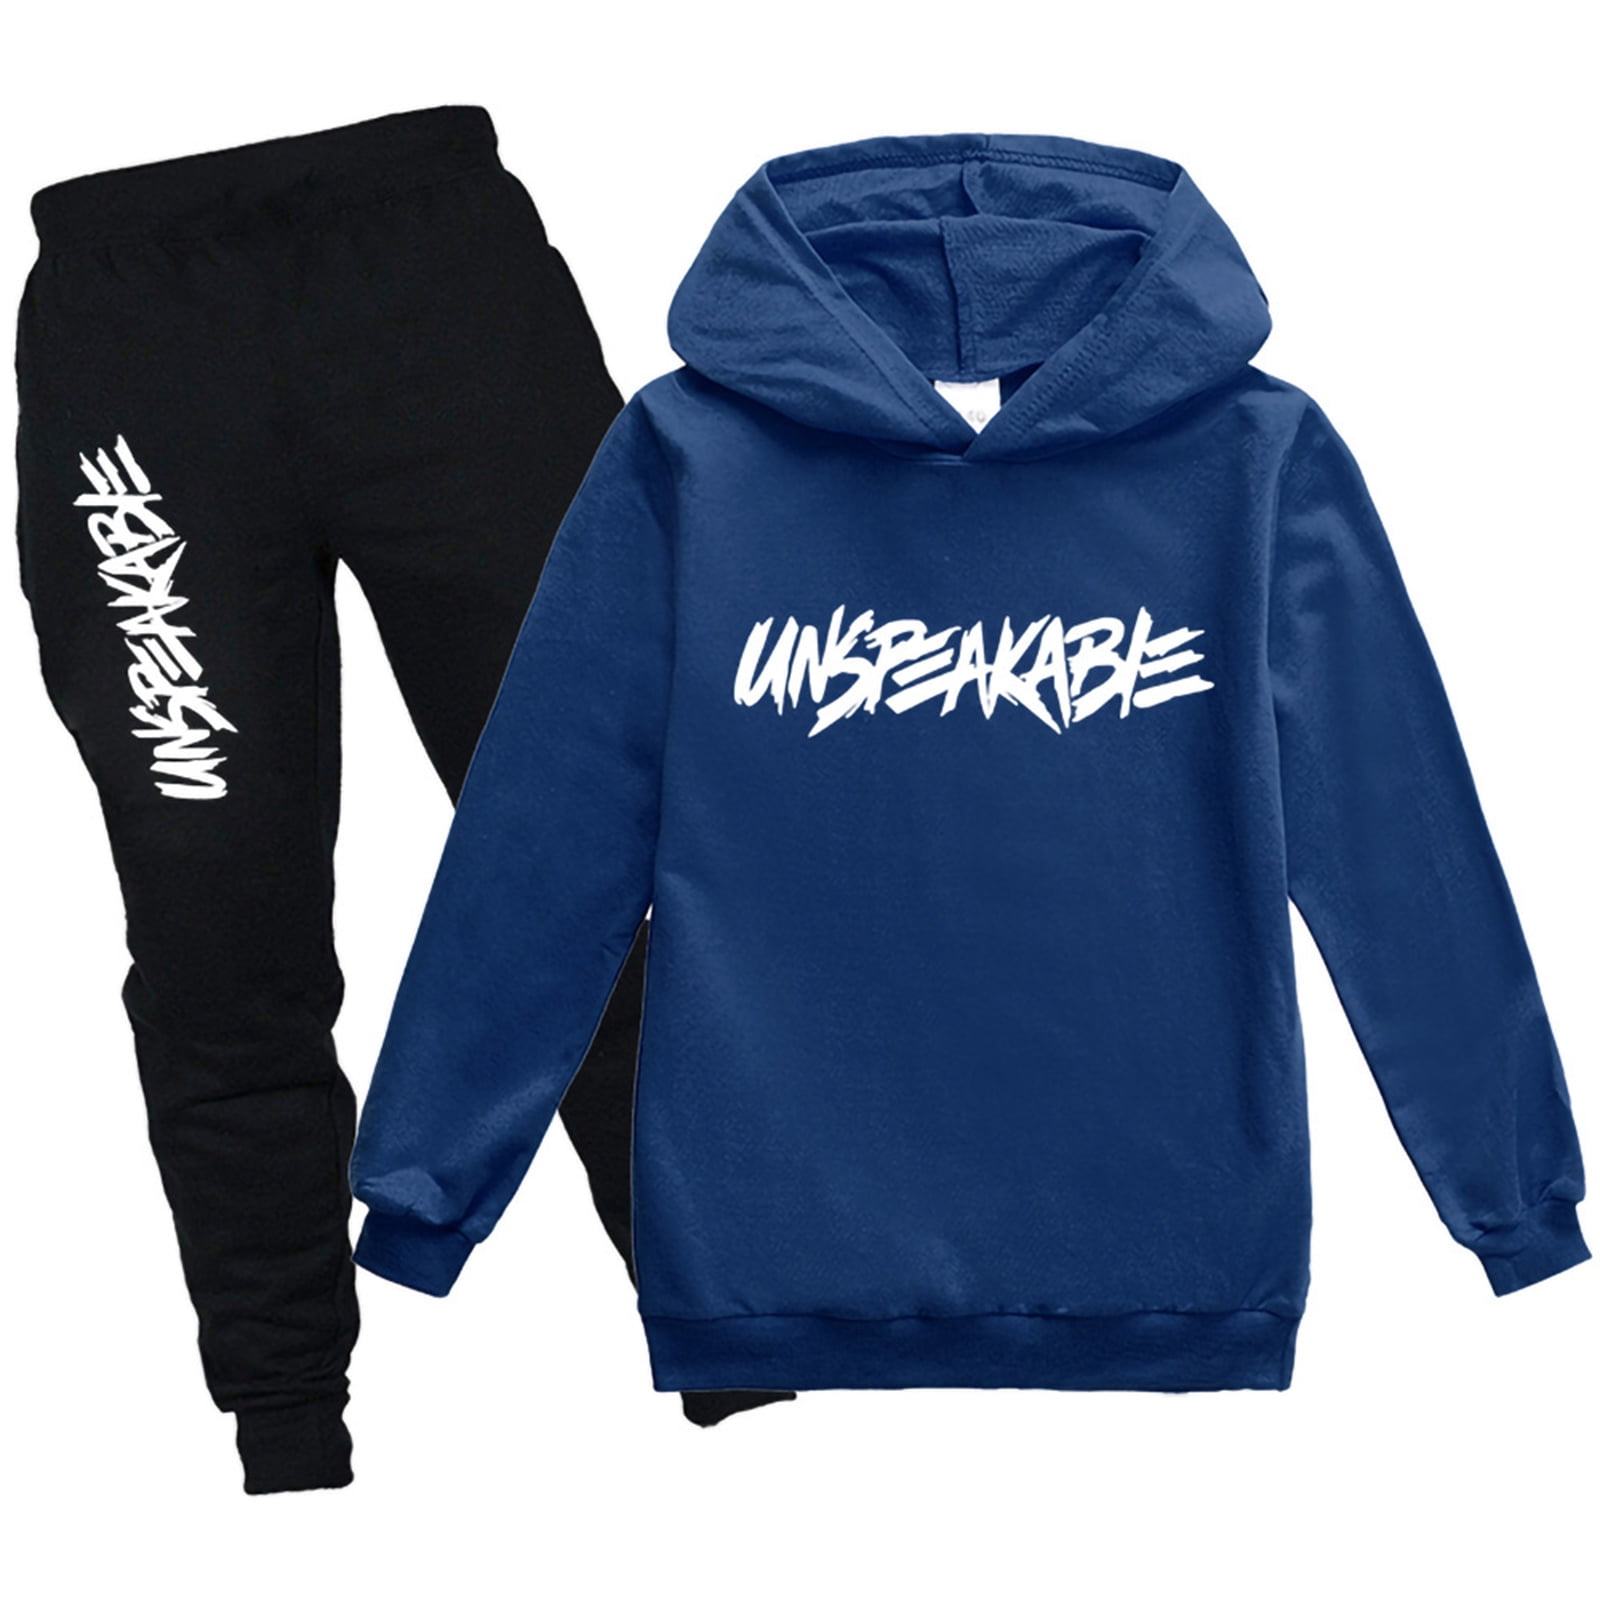 Unspeakable Merch Kids Hoodie and Pants for Boys and Girls Sport Tracksuit 